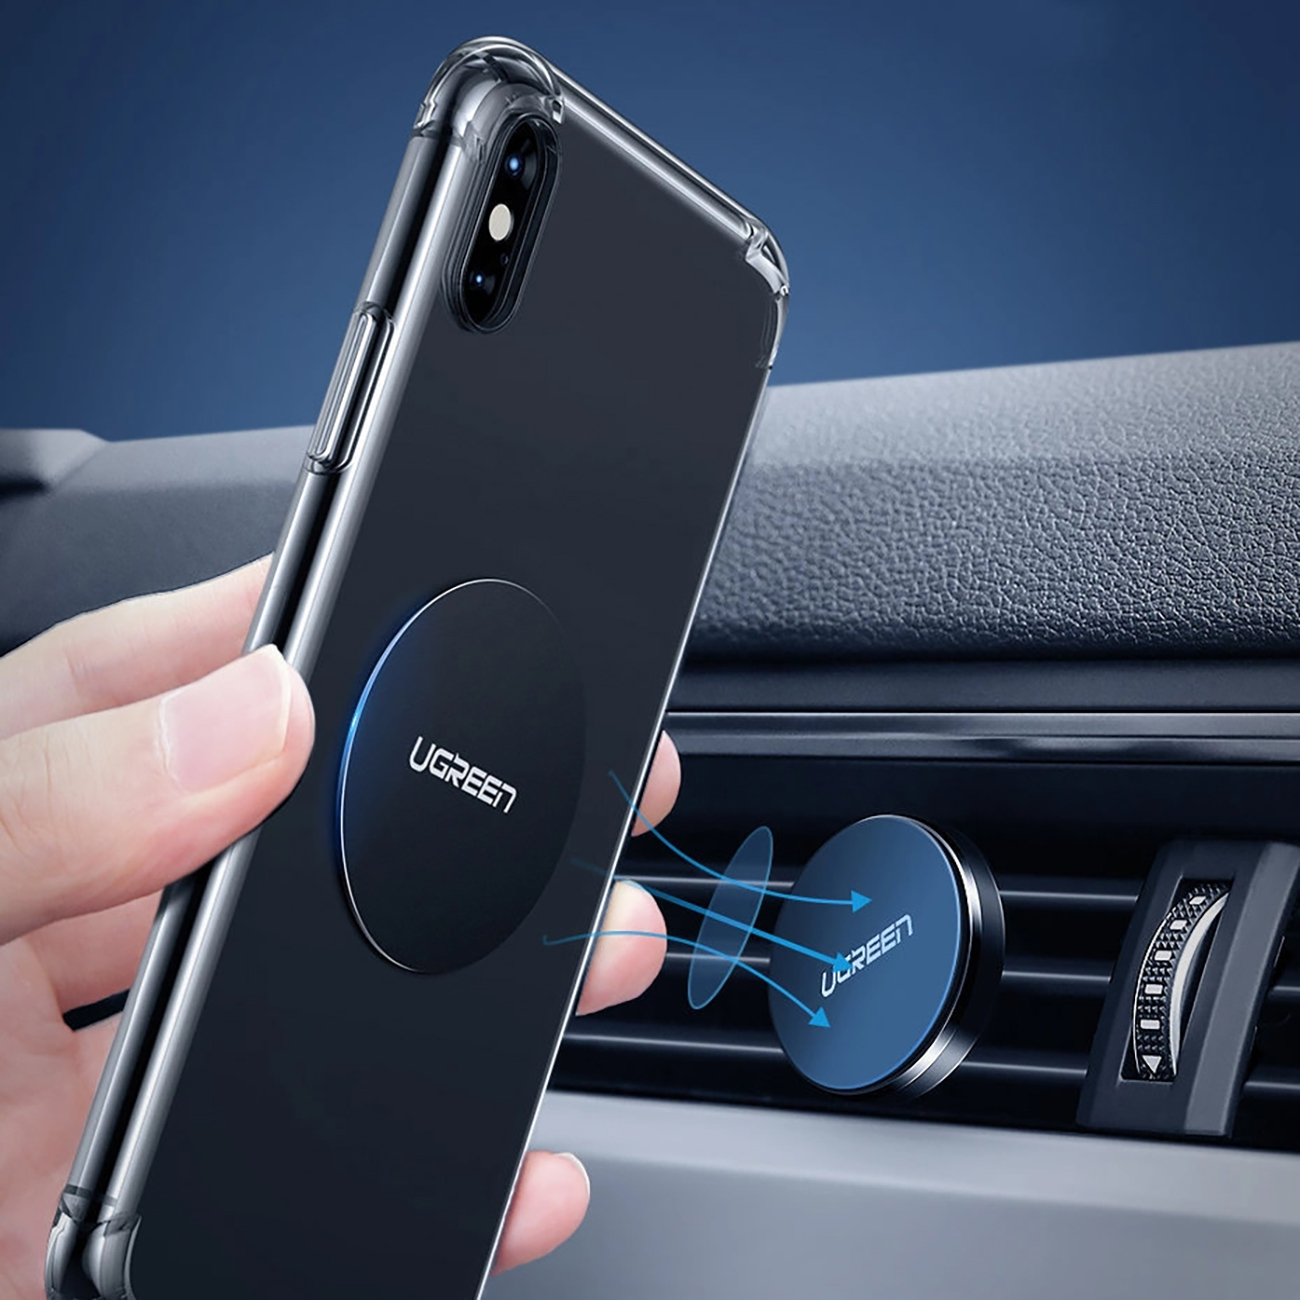 The phone is attached to the car holder using the Ugreen LP123 magnetic holder plate